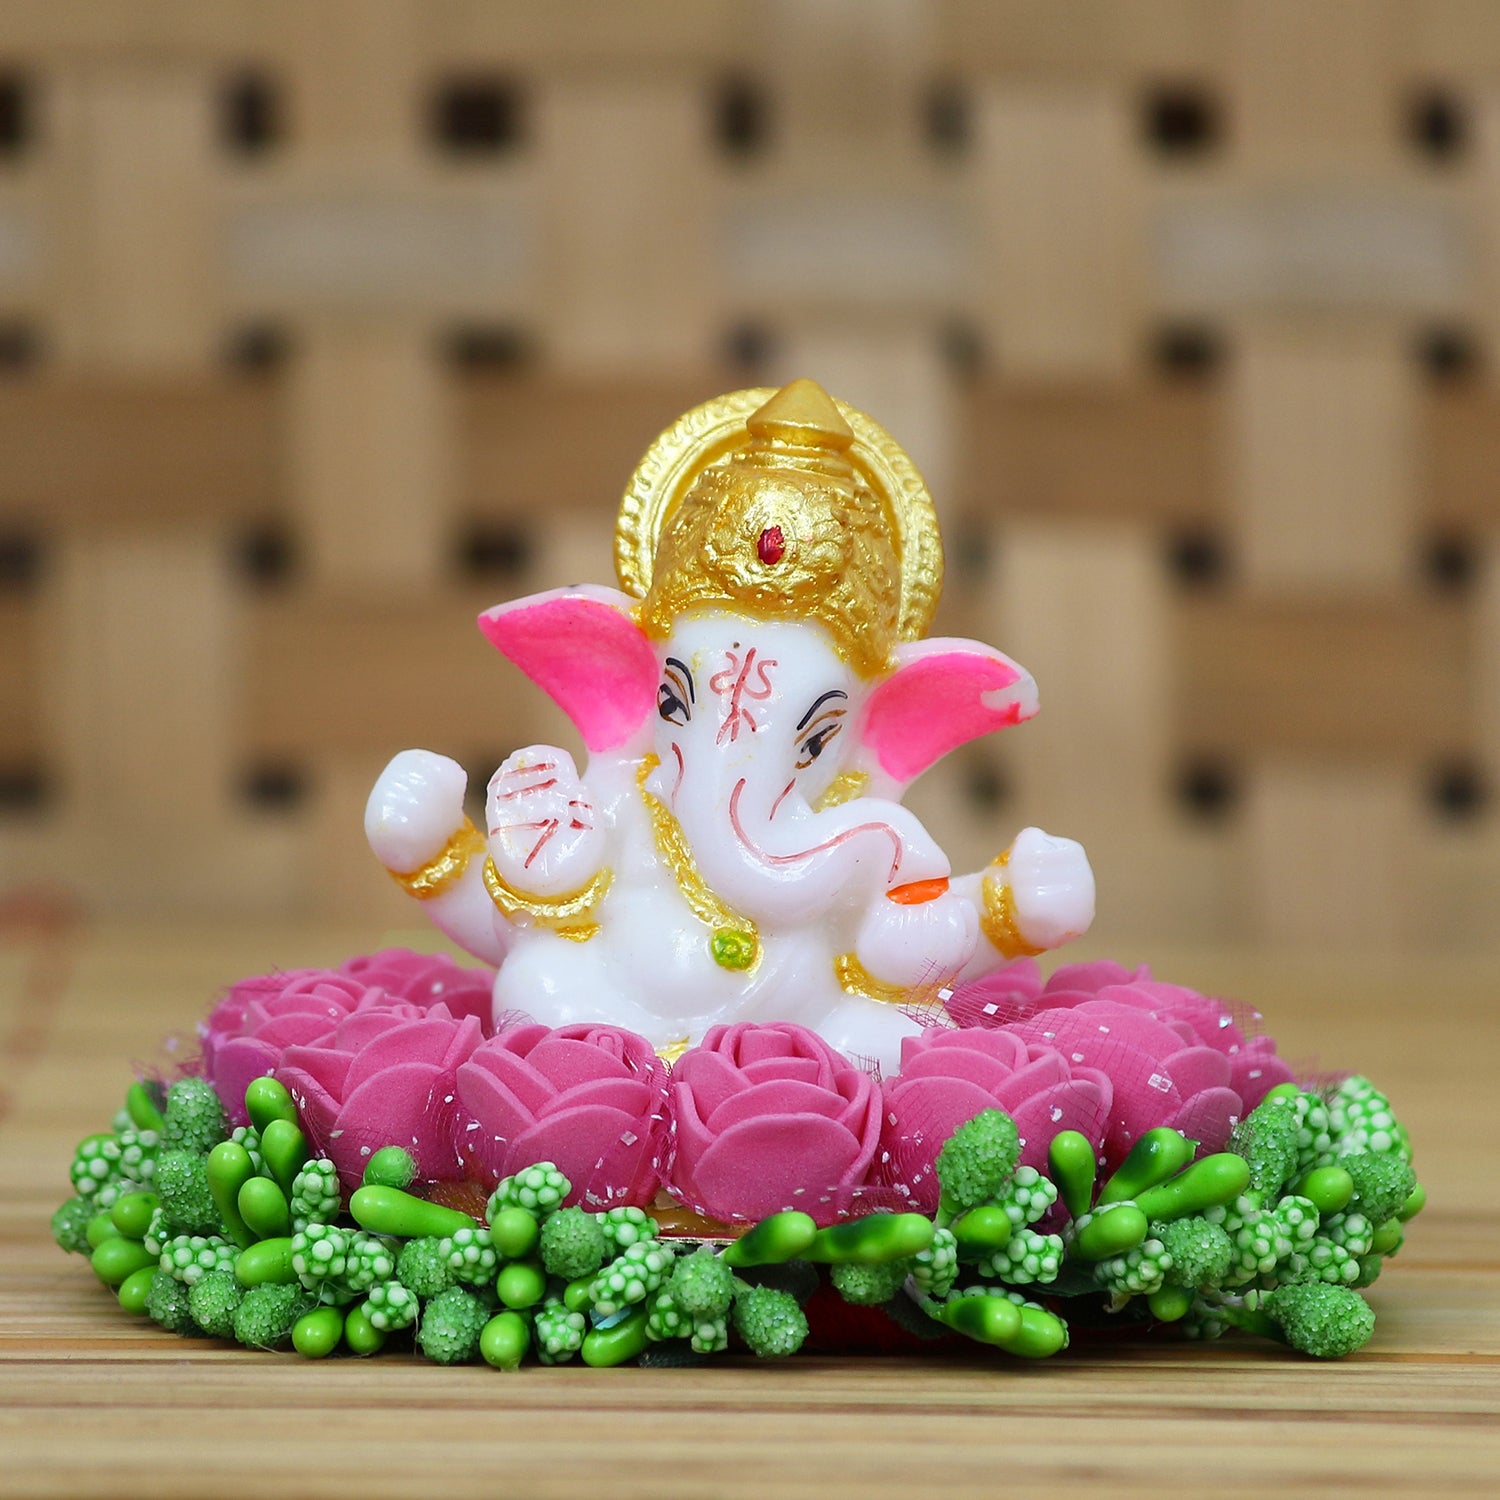 Lord Ganesha Idol On Decorative Handcrafted Pink Flowers Plate 1